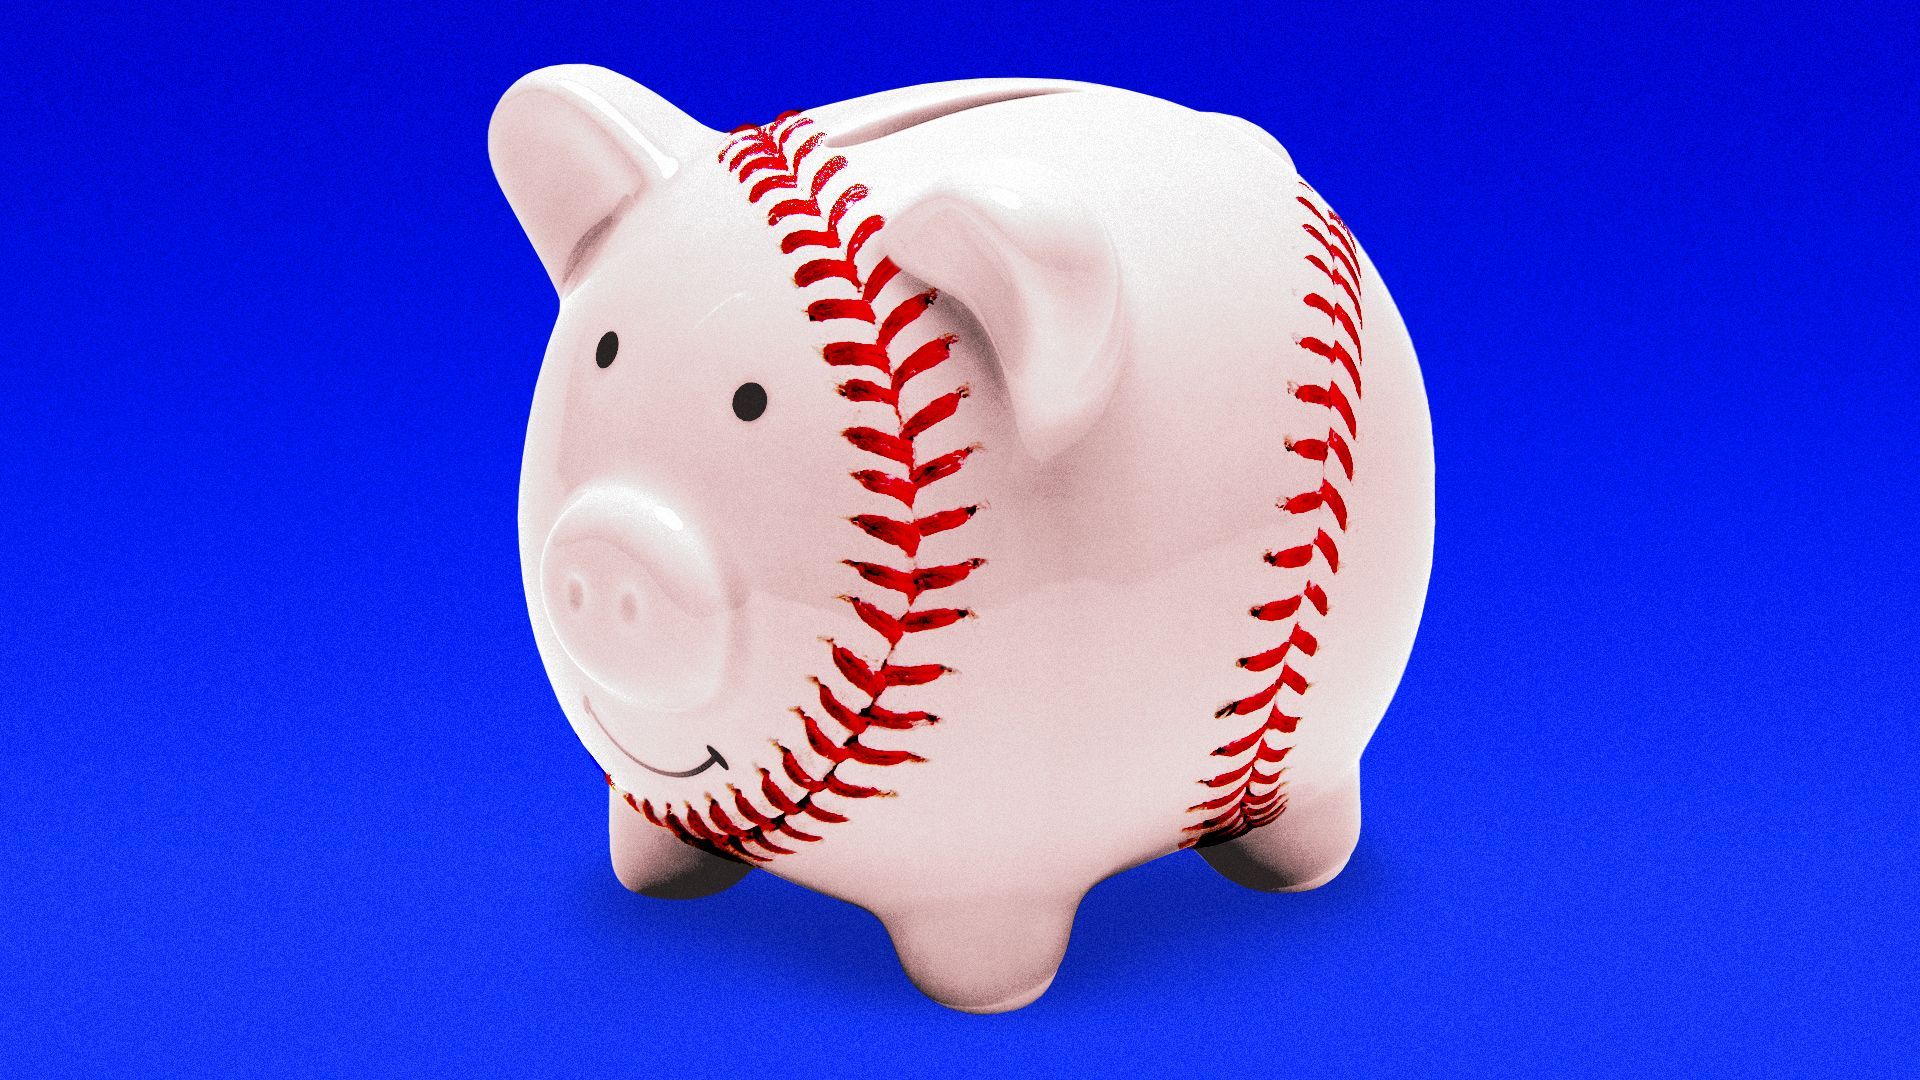 Illustration of a piggy bank whose round body resembles a baseball with red stitching